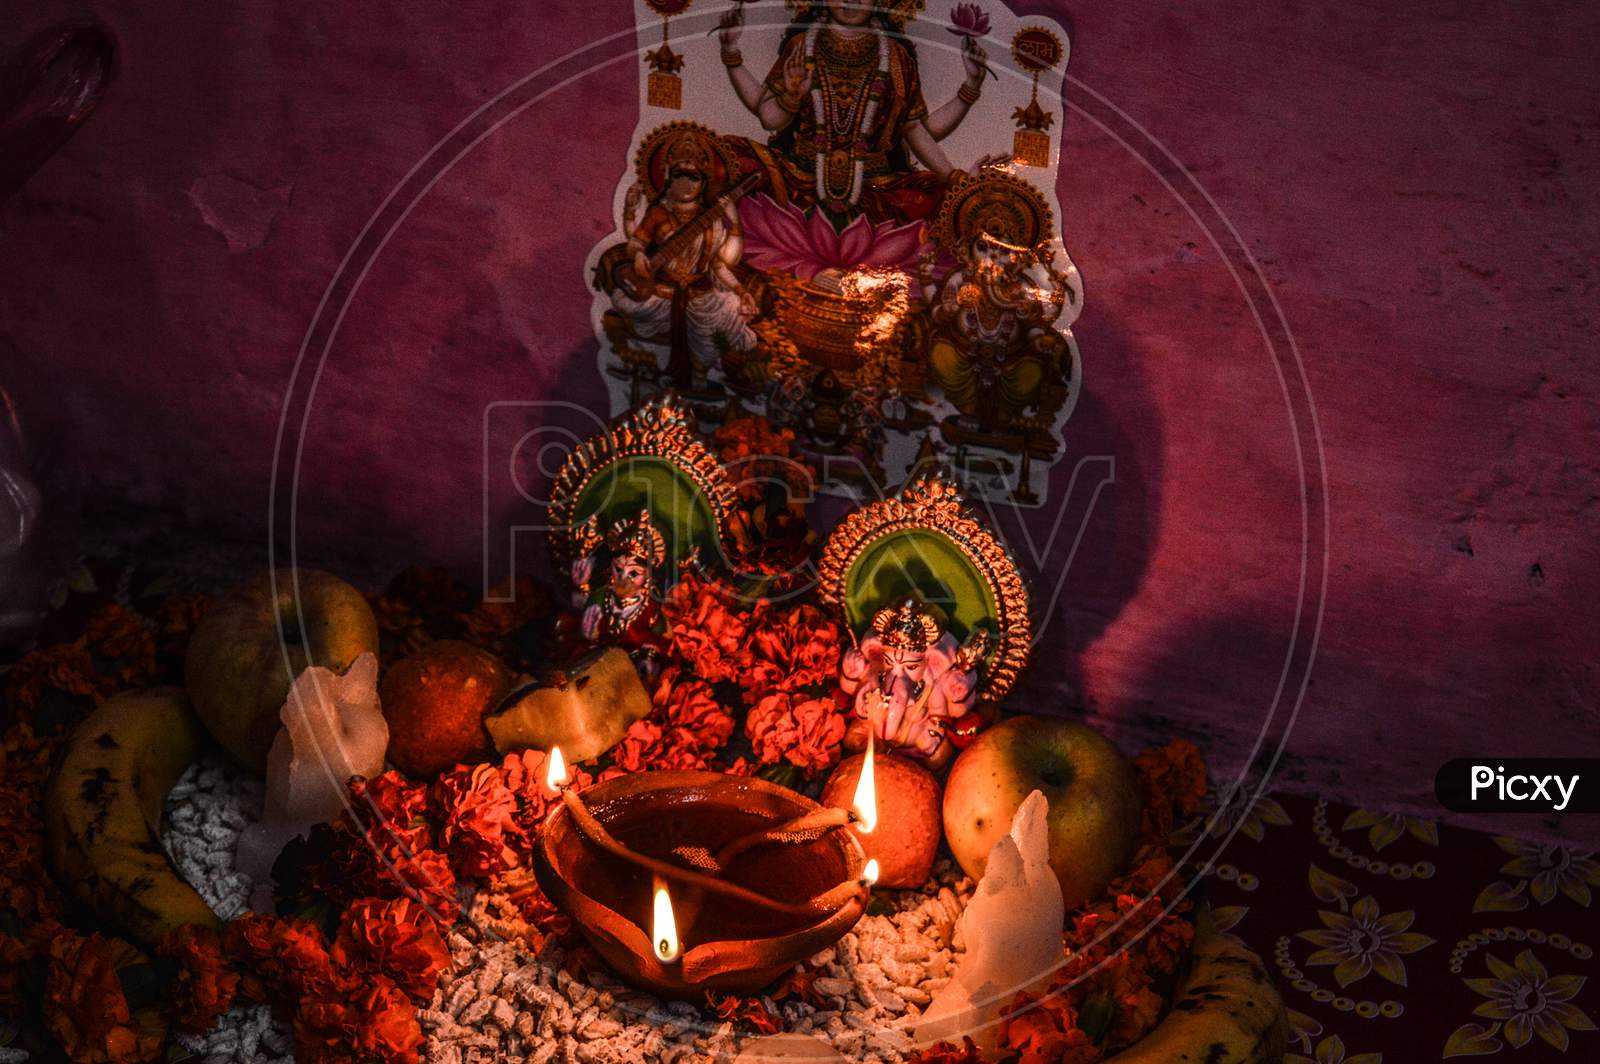 Indian God Statue With Rose And Candle On Indian Festival Diwali Deepawali With Fire Isolated On Table